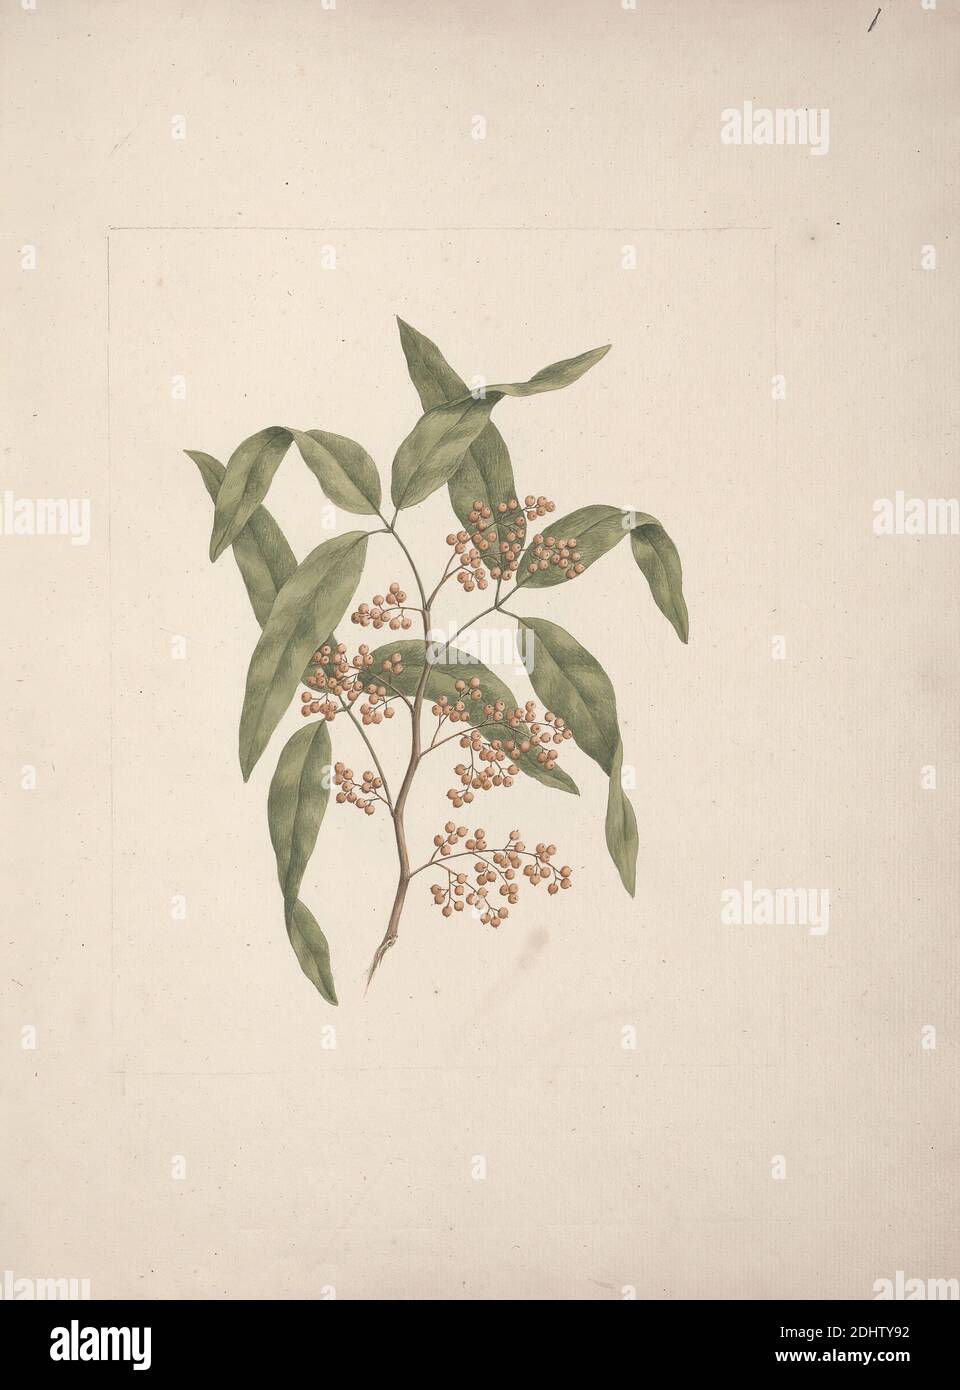 Alge indeterminate species (Seaweed): finished drawing of habit of weed, Luigi Balugani, 1737–1770, Italian, undated, Watercolor and graphite on medium, slightly textured, cream laid paper, Sheet: 15 15/16 × 12 5/16 inches (40.5 × 31.3 cm) and Binding: 16 1/4 inches (41.3 cm Stock Photo